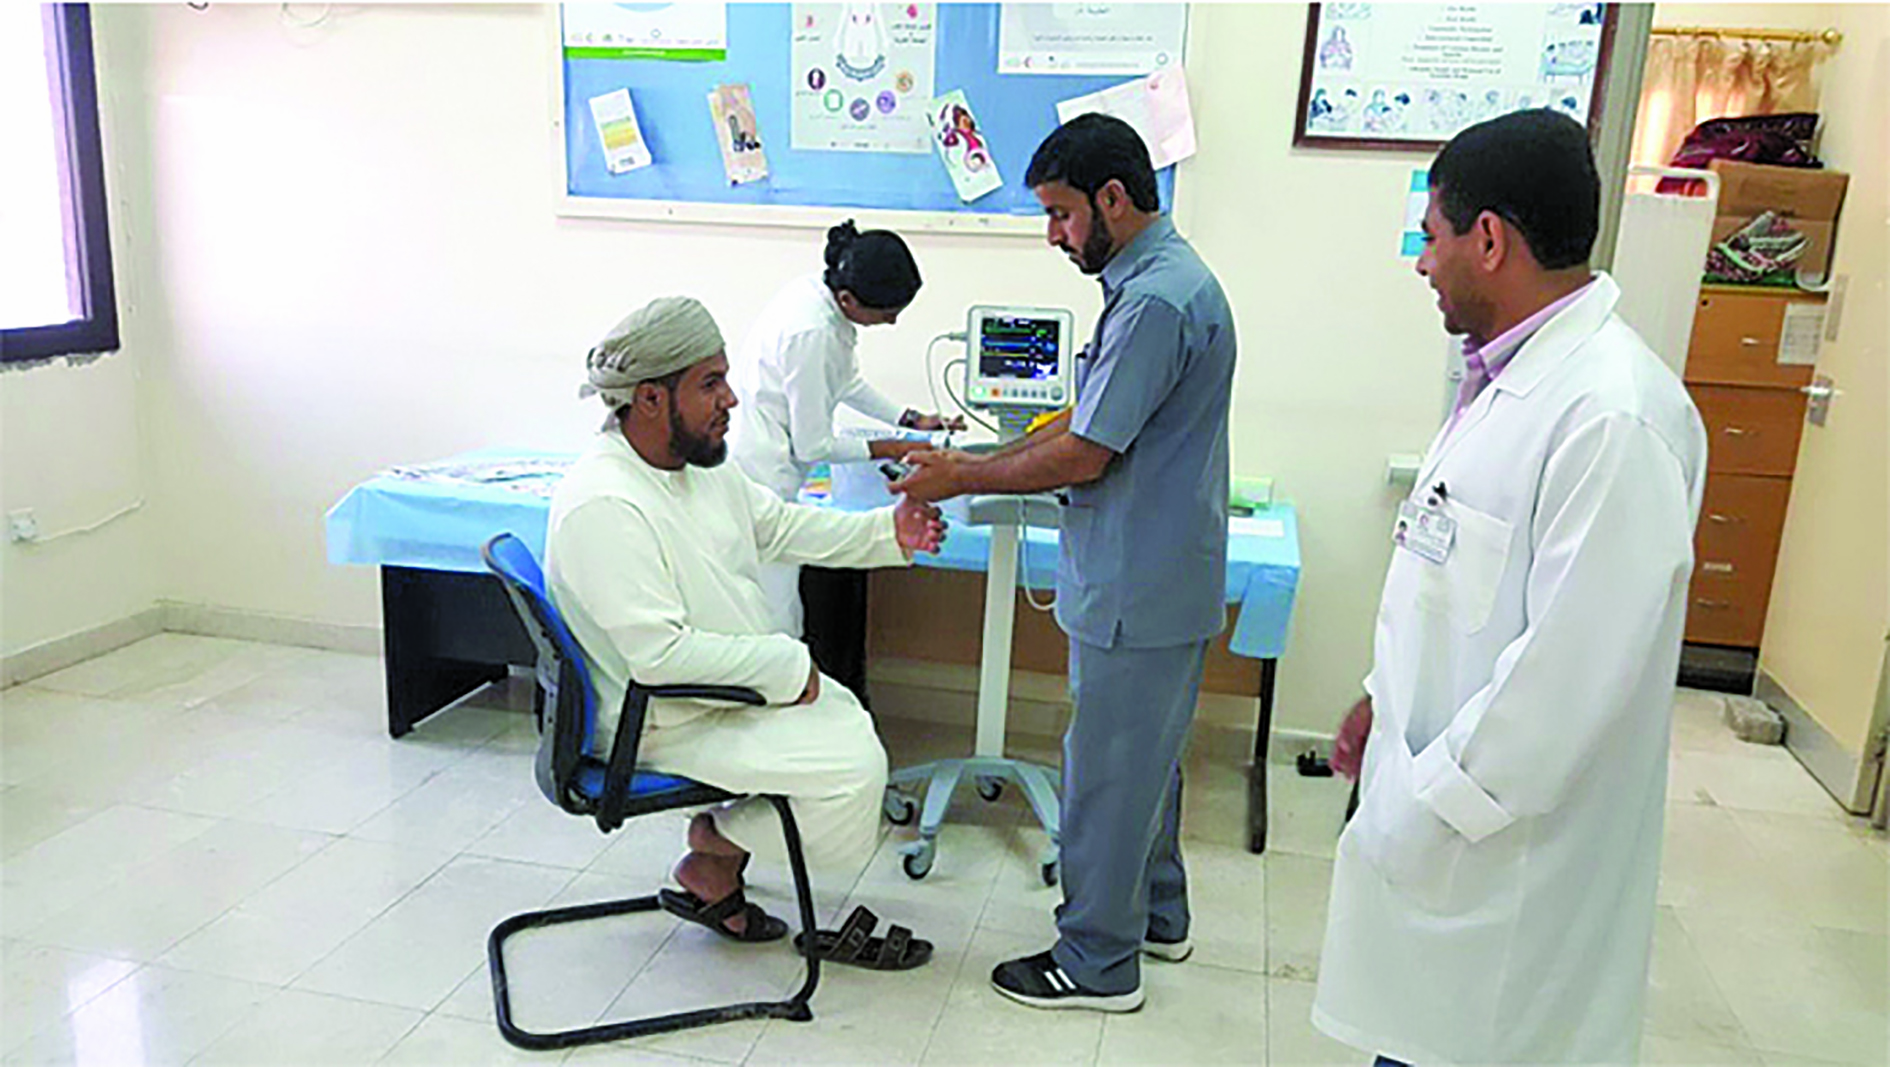 Over 500 examined during health drive in Oman